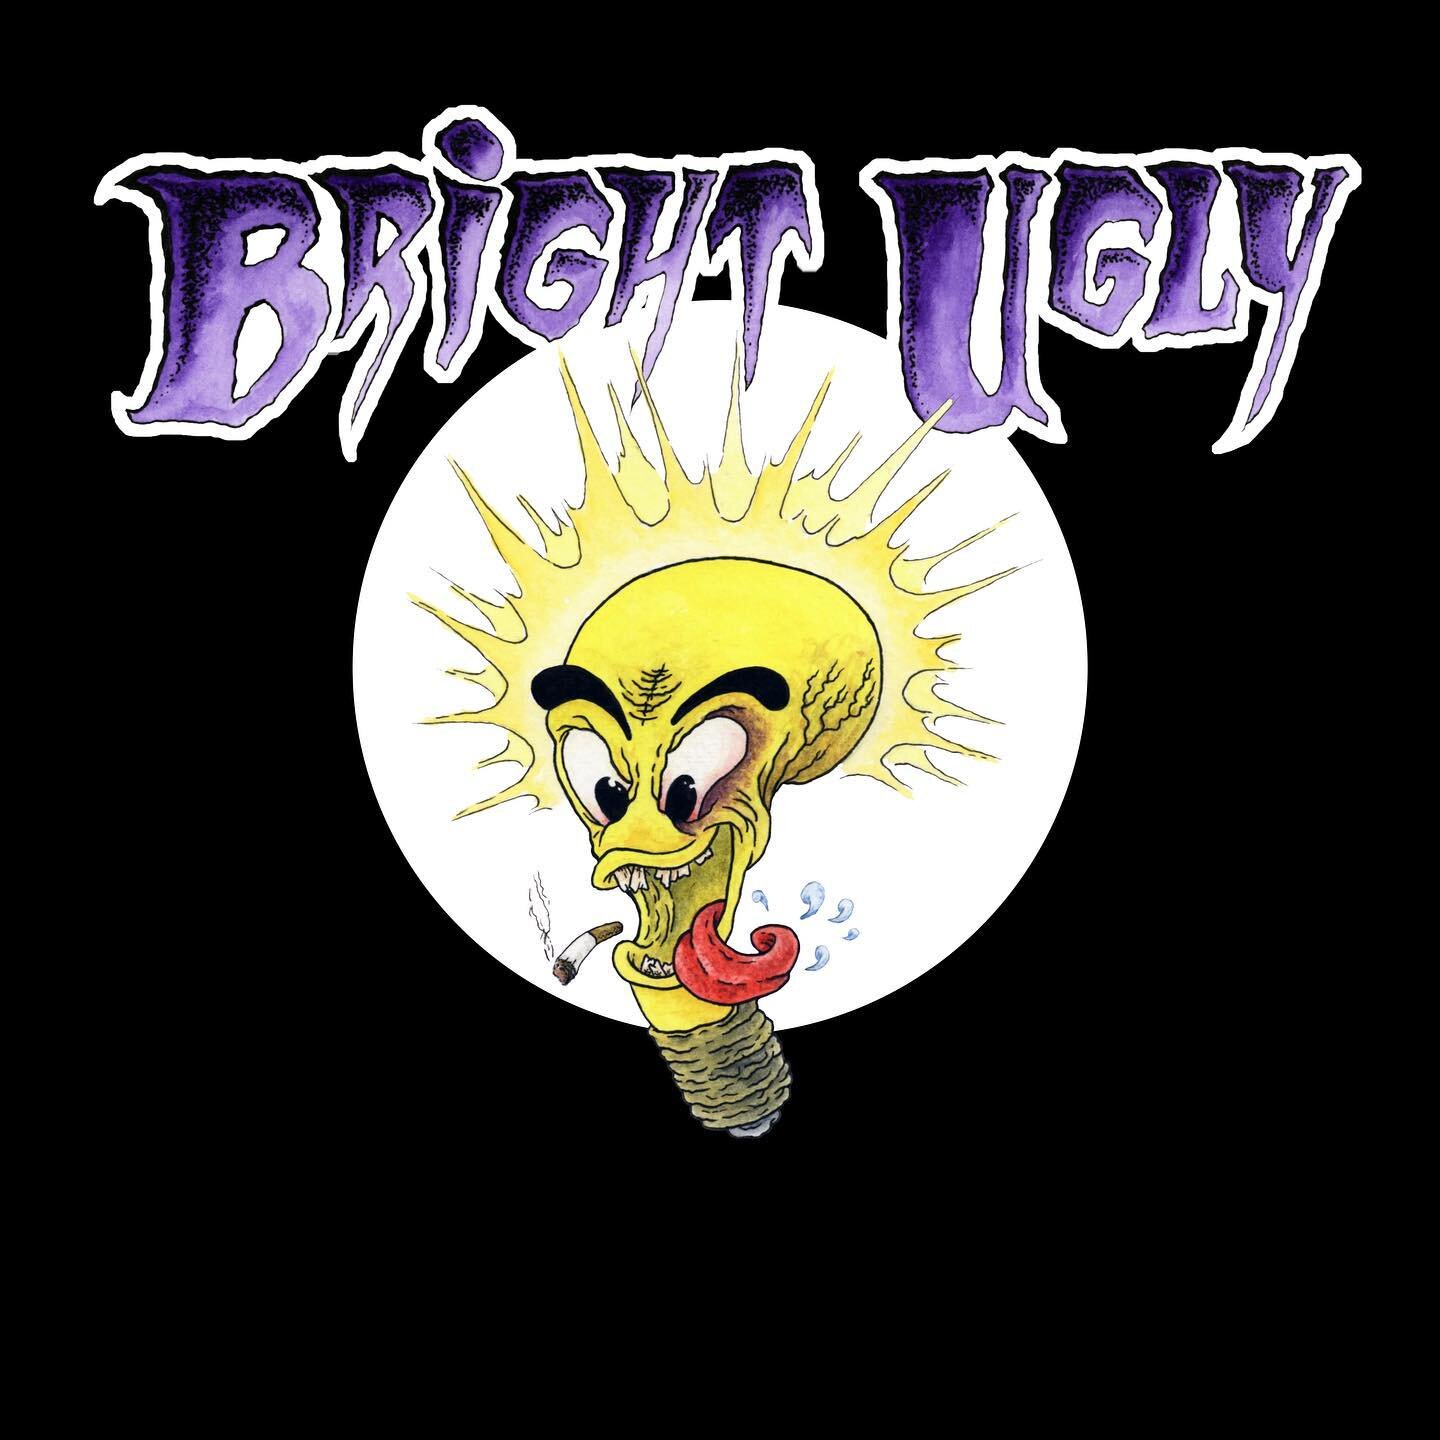 My band @brightugly has not been able to play a live show yet, so you best believe that as soon as we are able to safely it&rsquo;s going to be a barn burner of a rock show

Listen to our demo at the link in bio

#stonerrockband #stonerrockguy #punkr